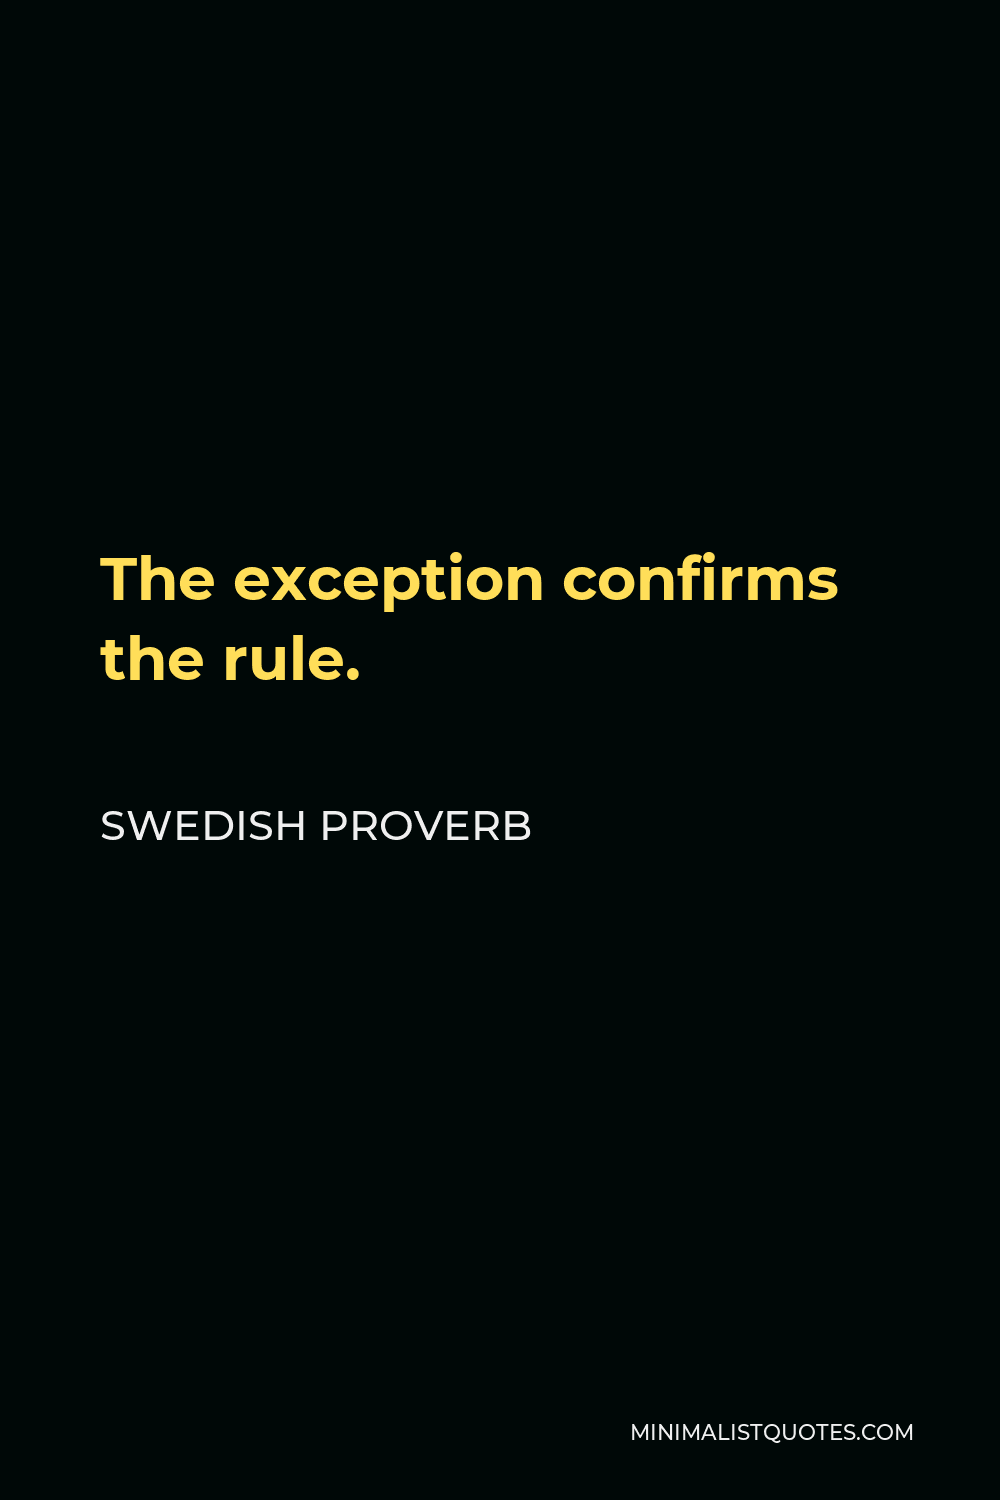 Swedish Proverb Quote - The exception confirms the rule.